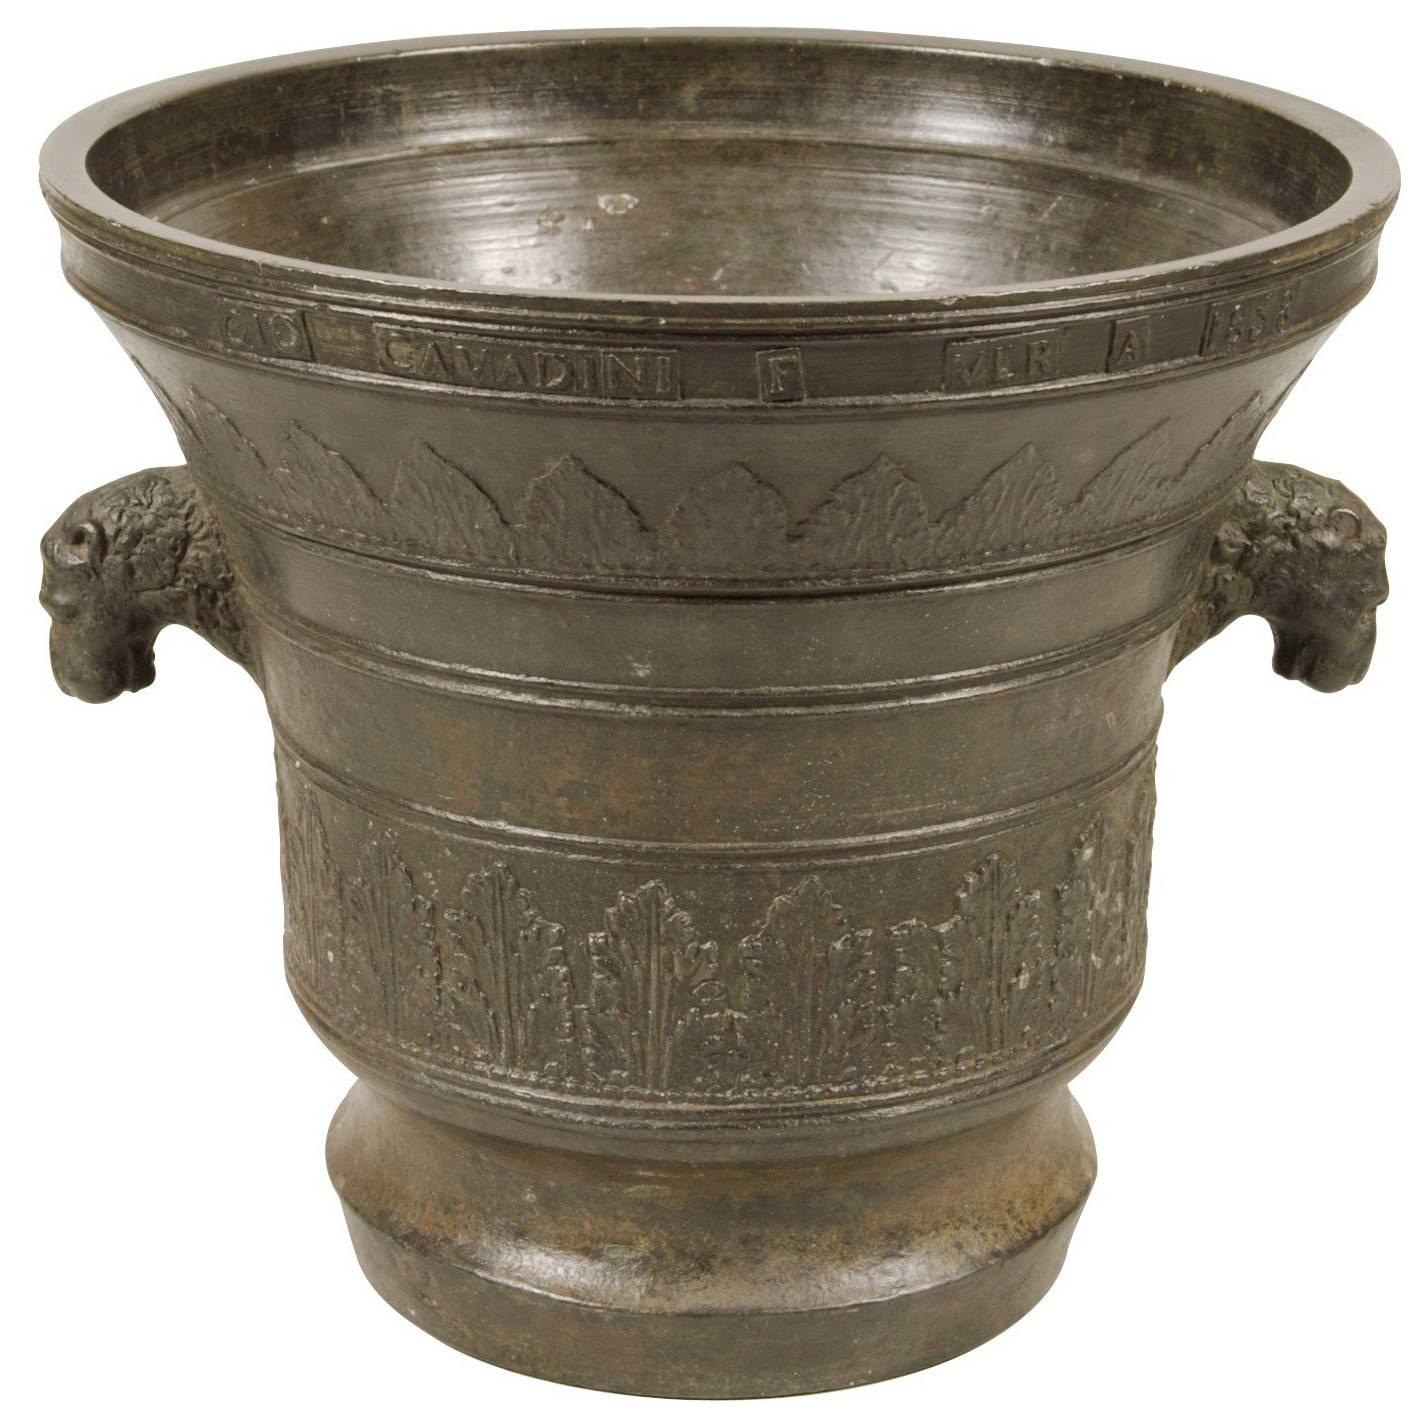 Very Large 19th Century Bronze Mortar with Lion Shaped Knop Handles For Sale